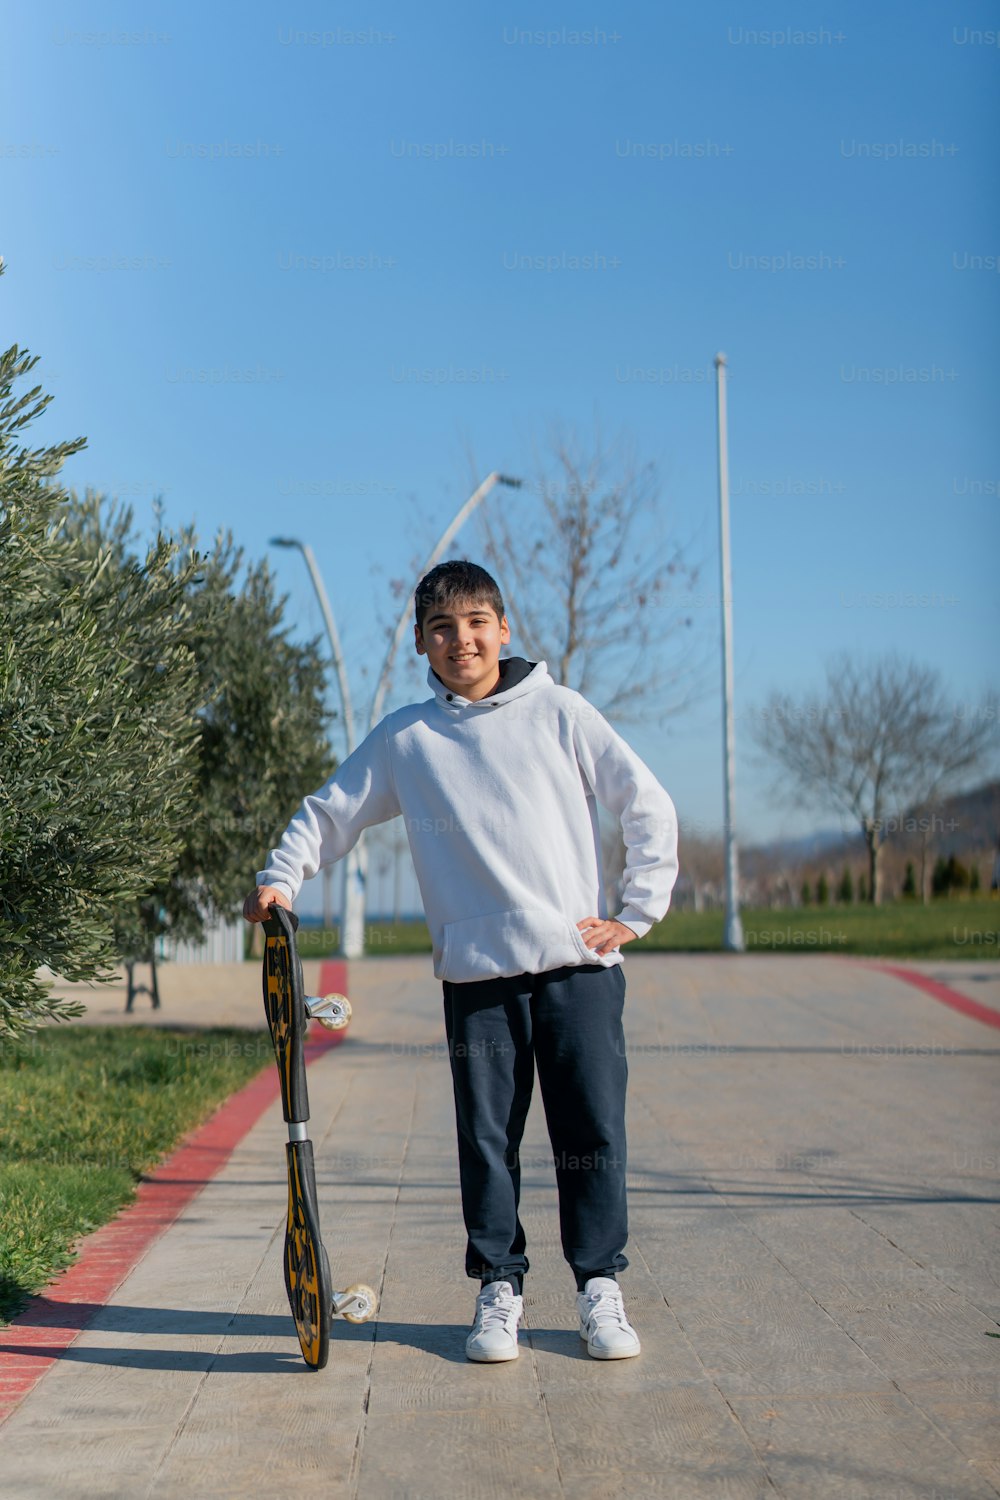 a young man standing on a sidewalk holding a skateboard